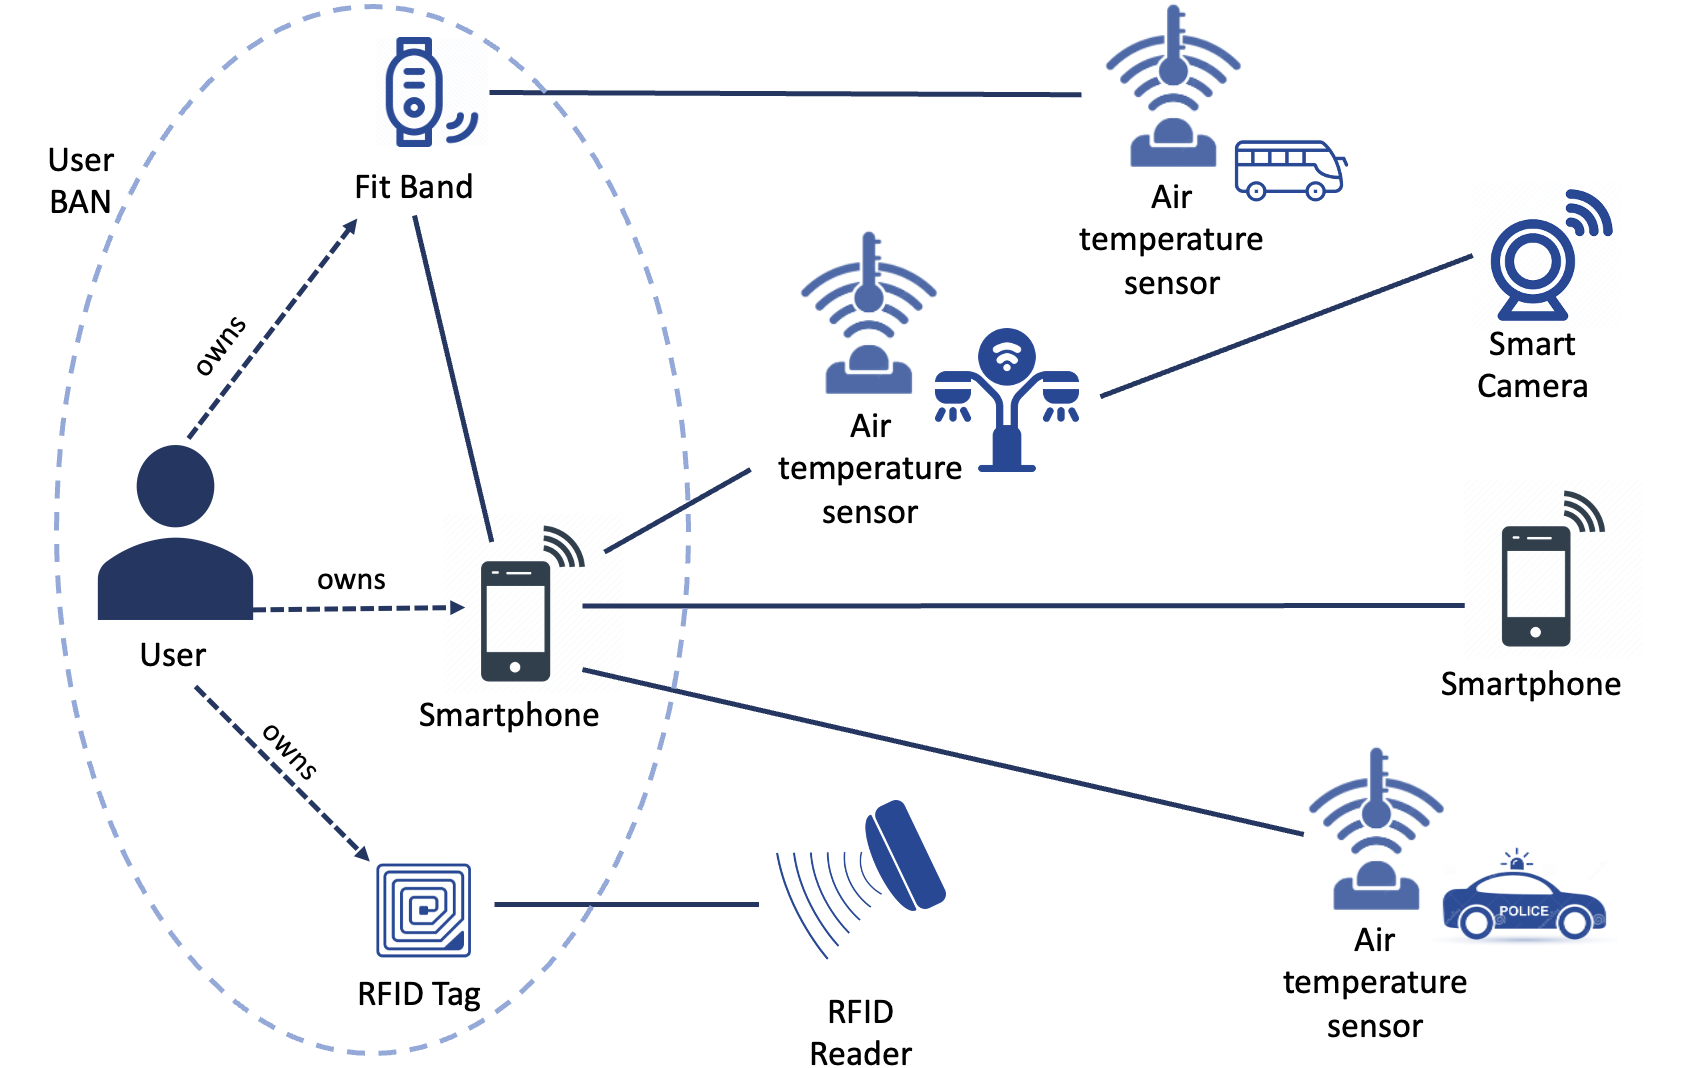 A Deep Reinforcement Learning Approach for Security-Aware Service Acquisition in IoT